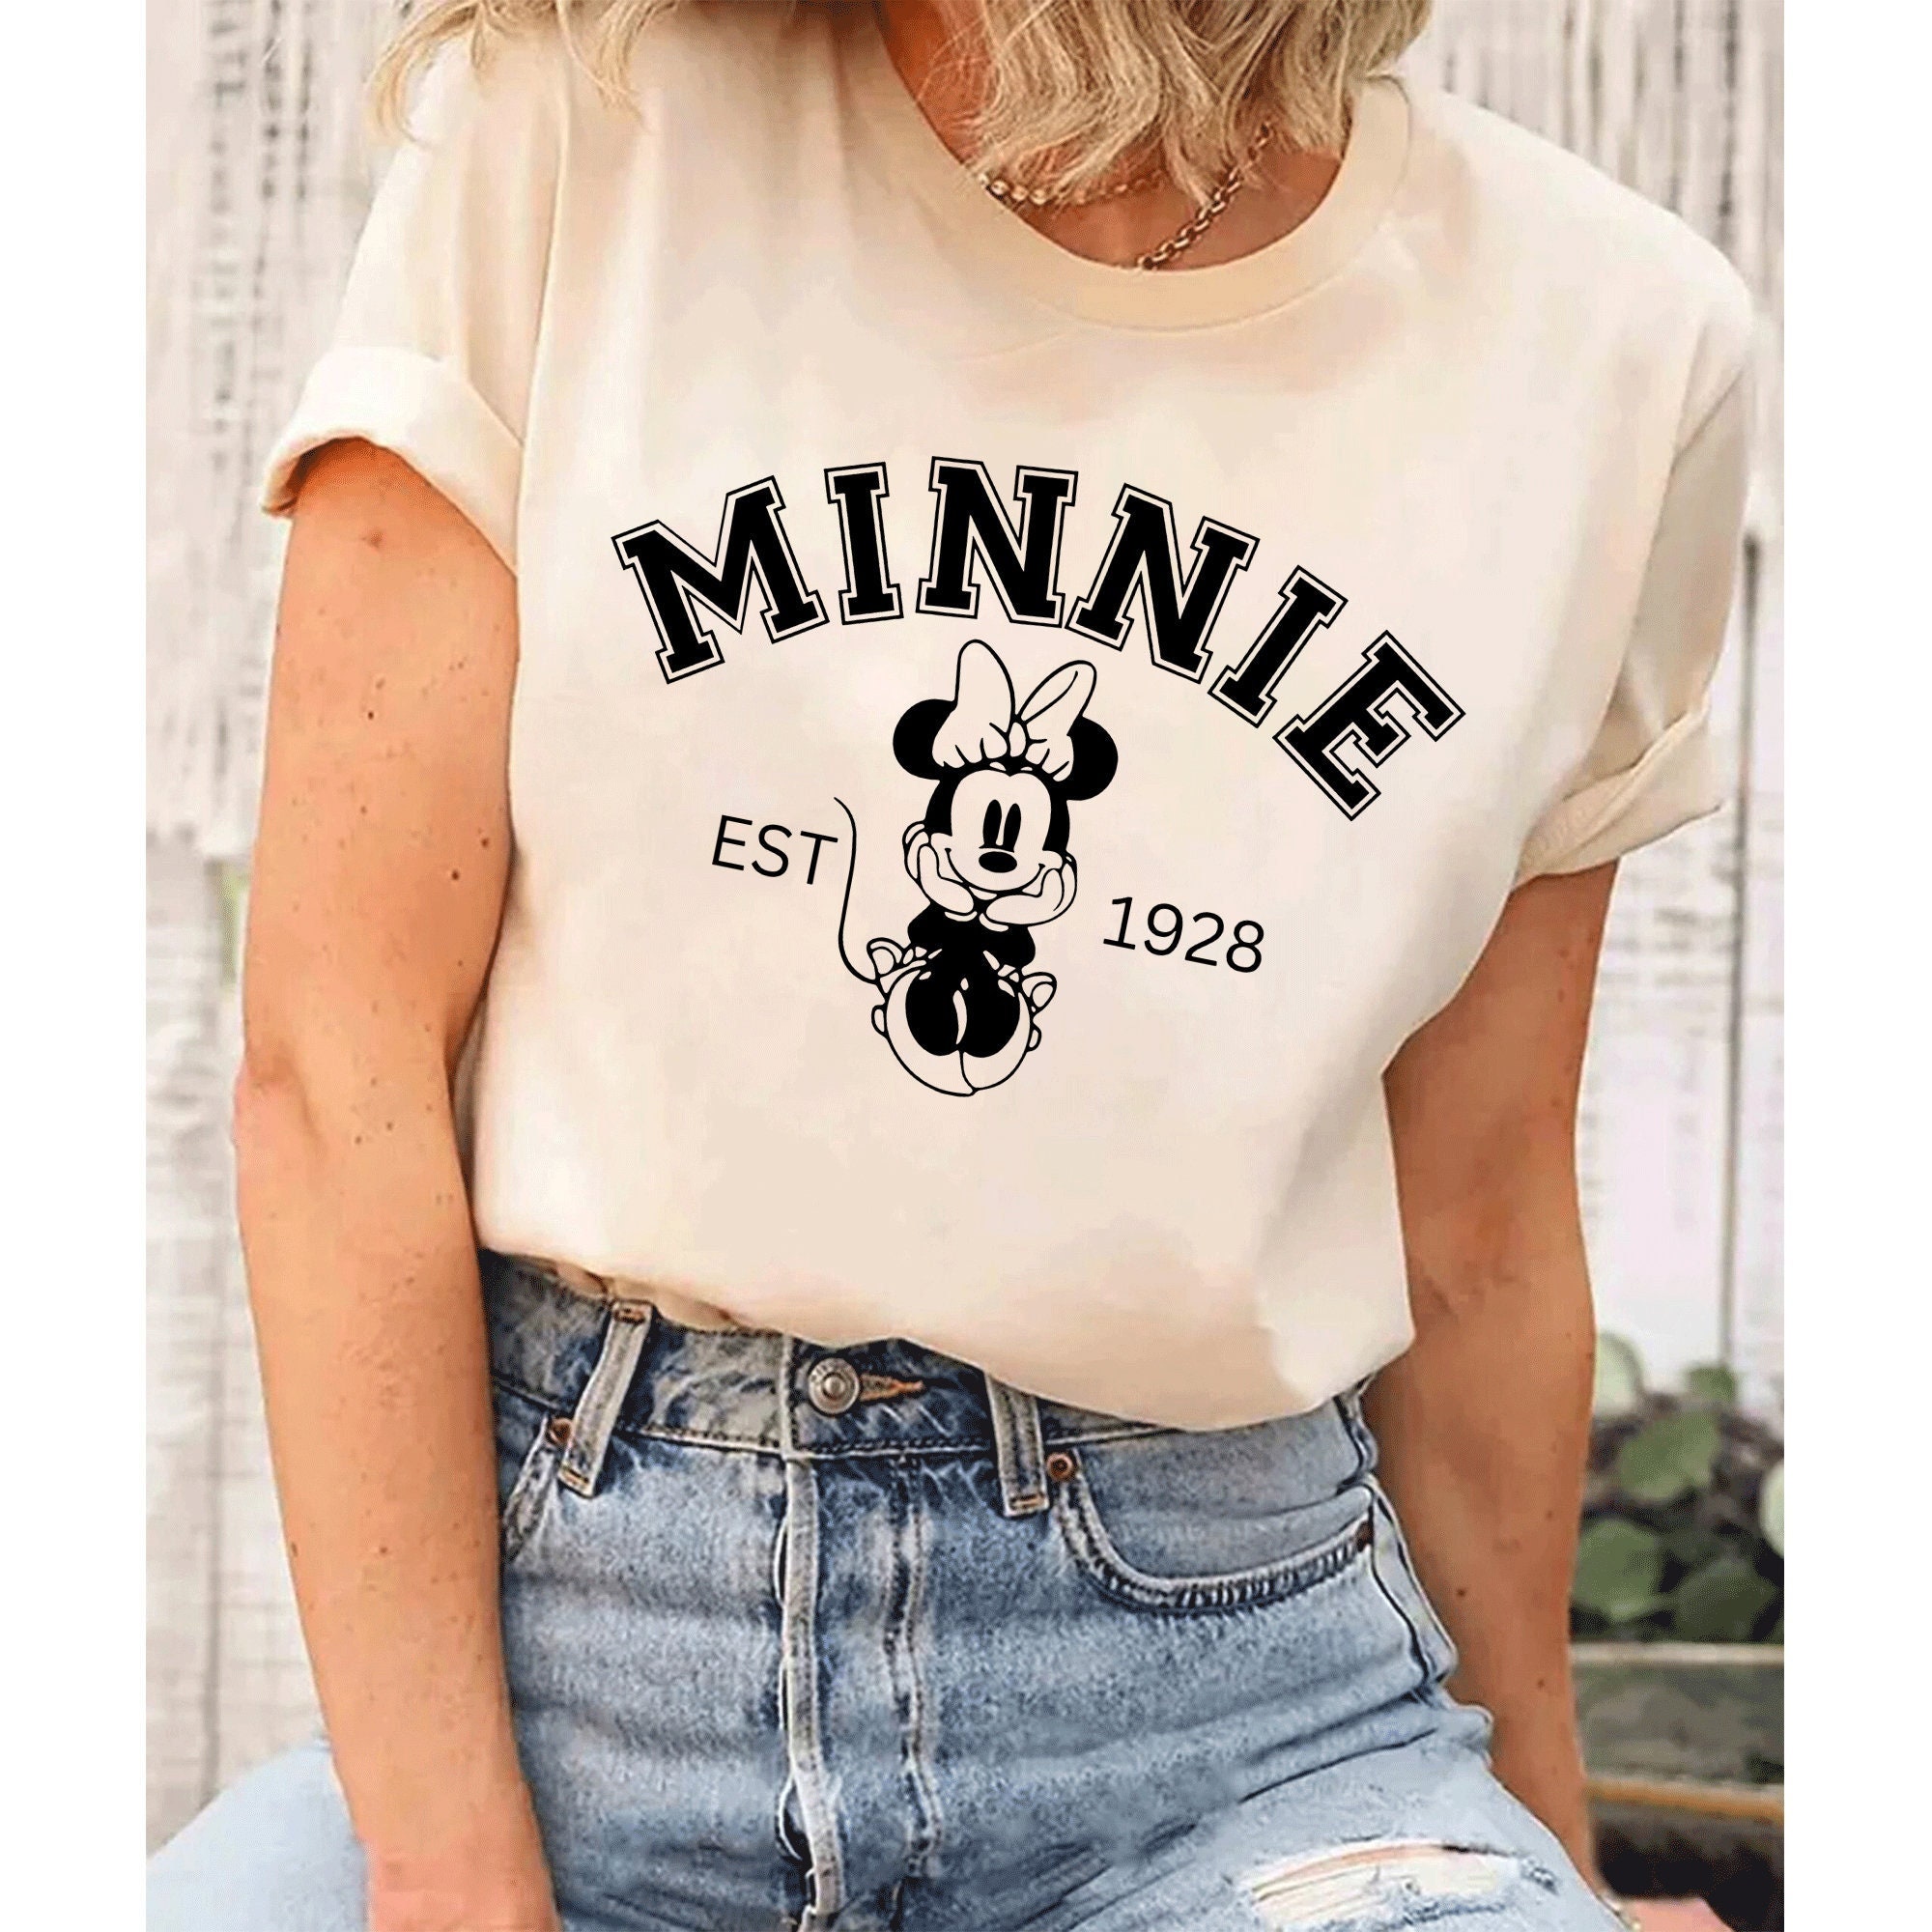 Chanel Minnie Mouse No 5 Shirt - Vintagenclassic Tee